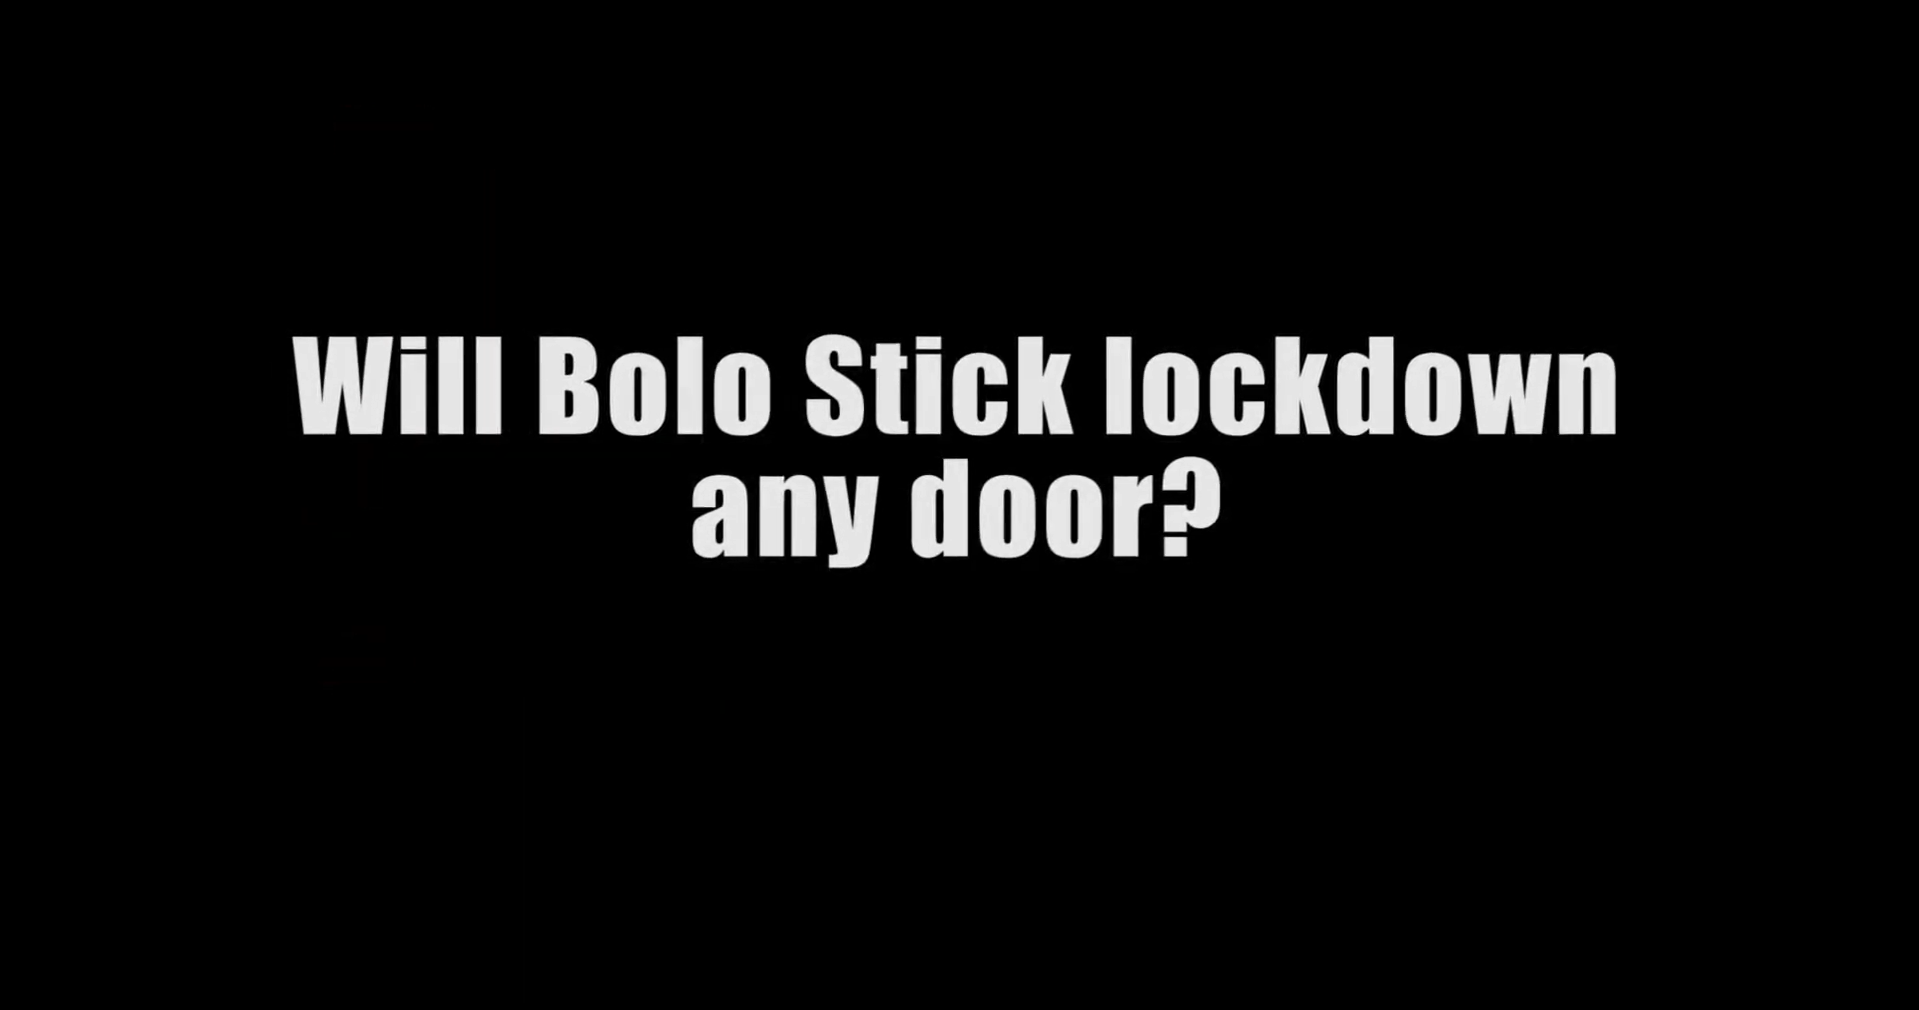 Is There Any Special Training To Use Bolo Stick Barricade Device?